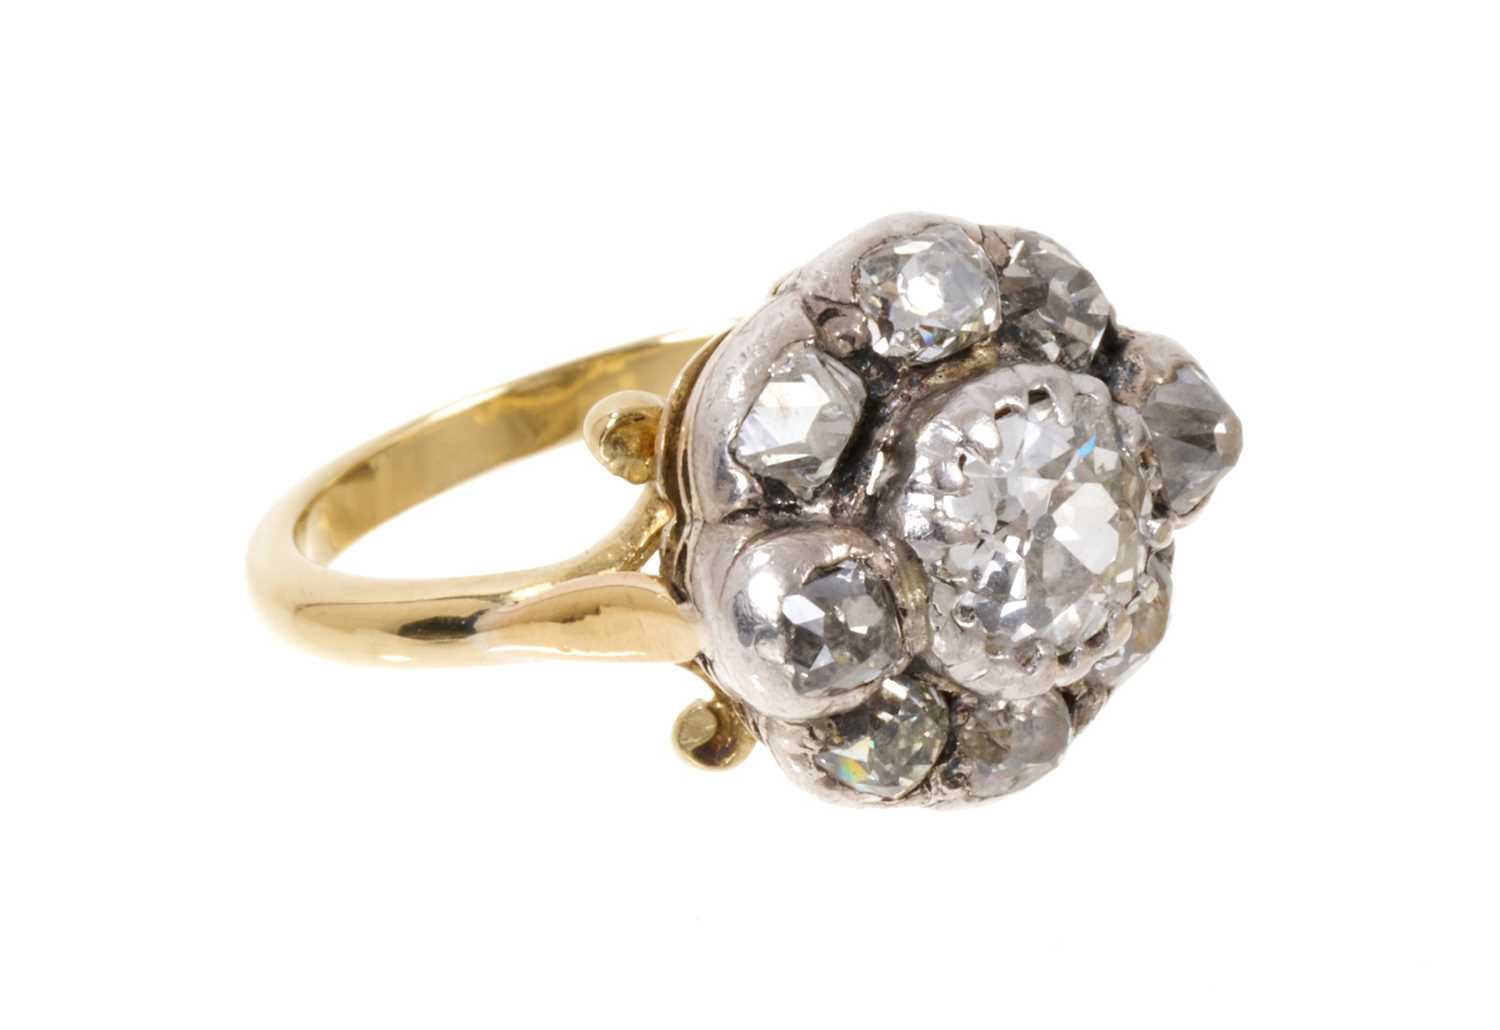 Antique diamond cluster ring - Image 2 of 3